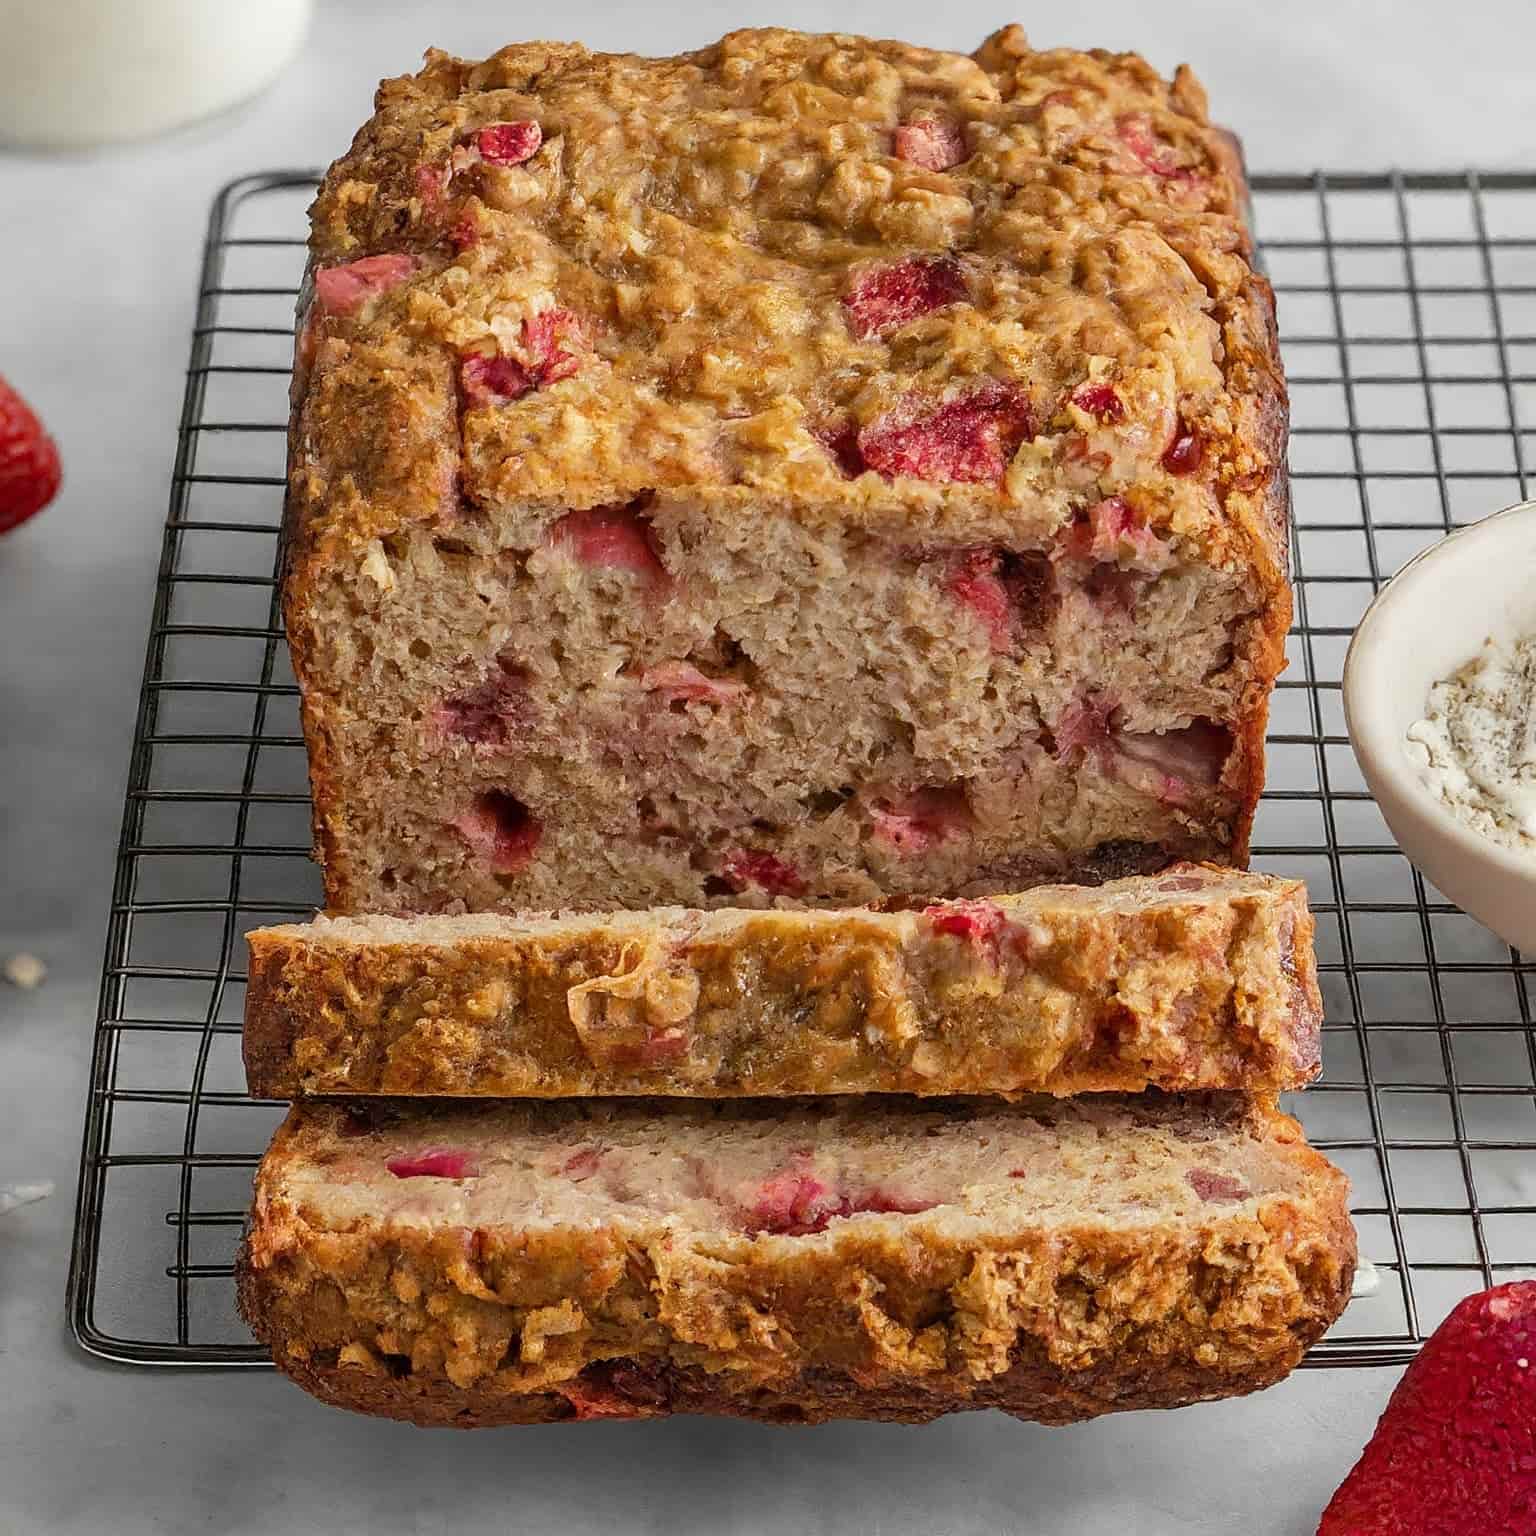 Strawberry Banana Bread Oats on a grill